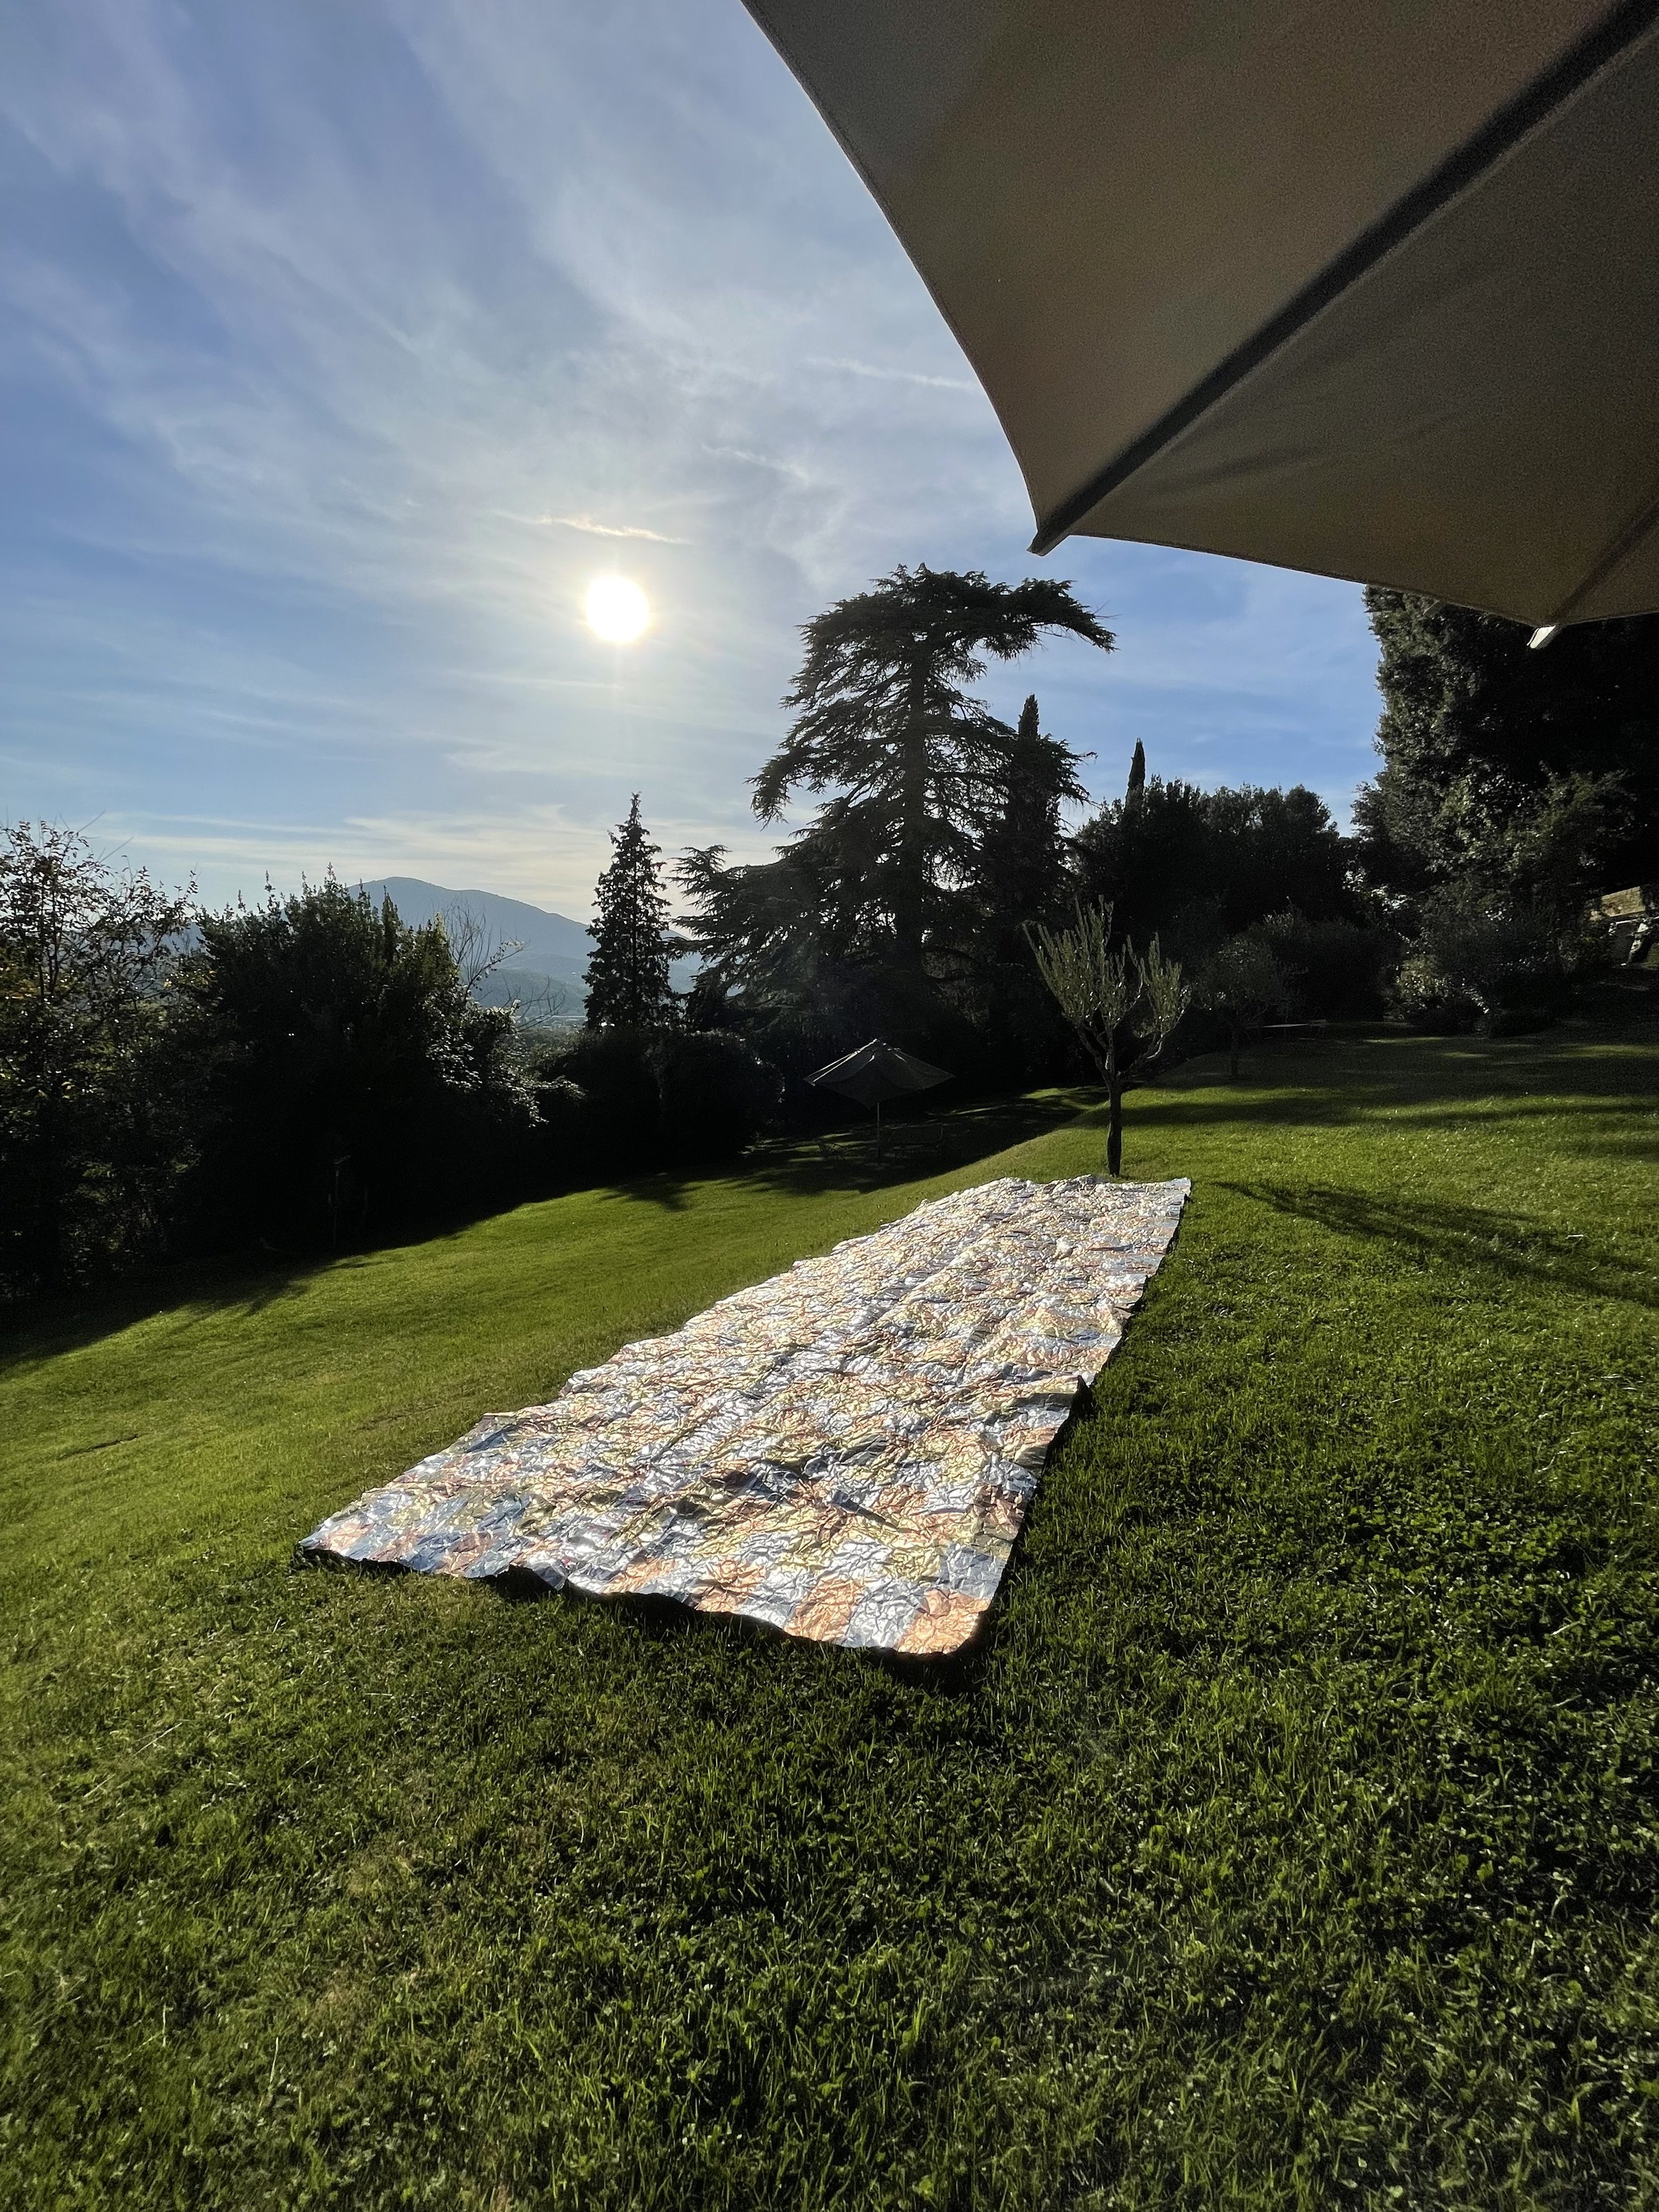   Damaged Emergency Blanket (for the Black Knight satellite having landed in Rome),  2019–2022, installation view, Civitella Ranieri, Umbertide, Italy, composition metal leaf, aluminum leaf, aluminum foil tape on distressed FujiFilm printing plate pa